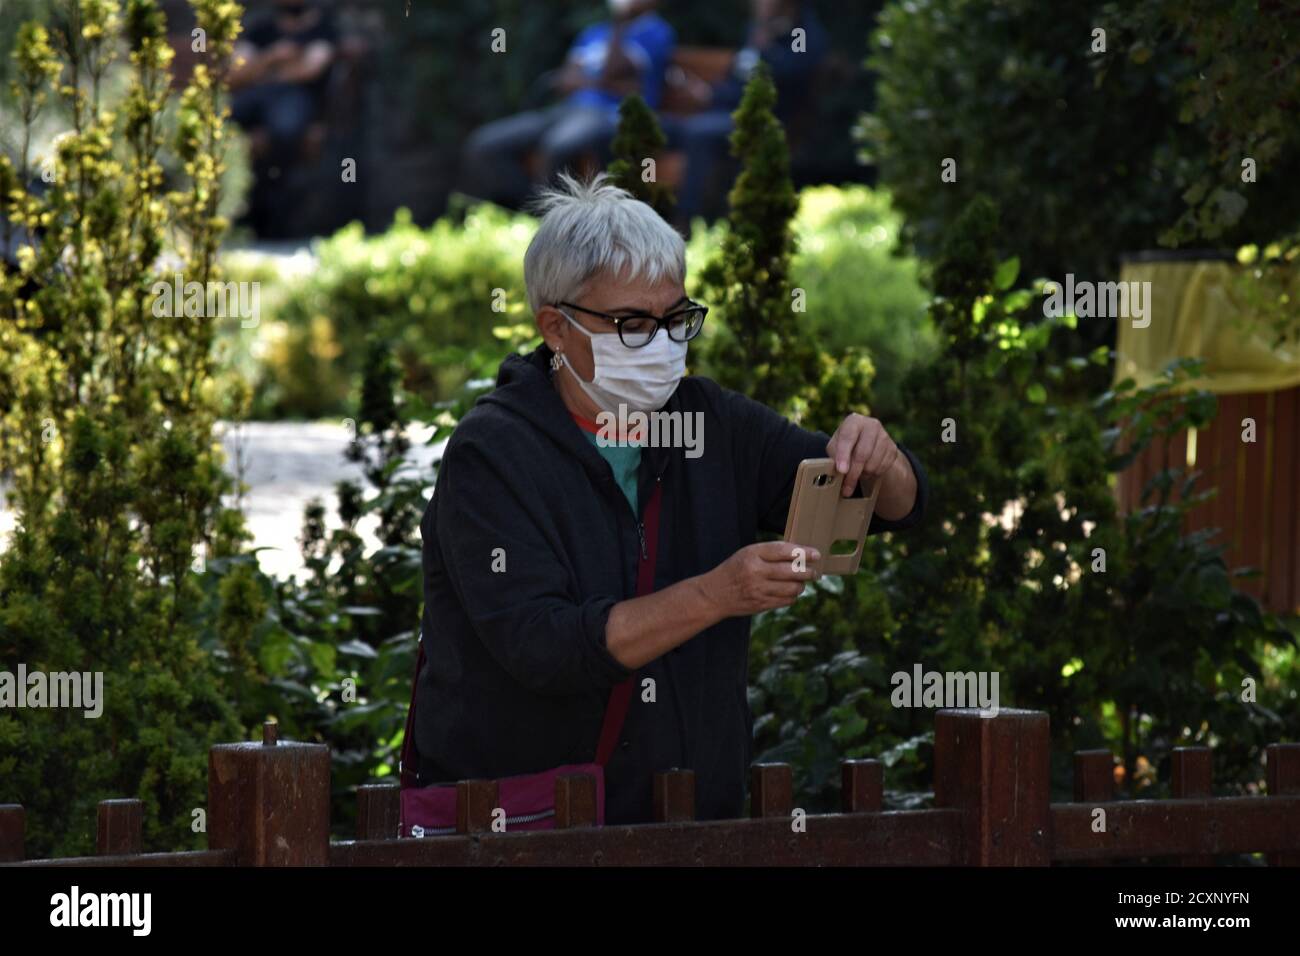 Ankara, Turkey. 1st Oct, 2020. A woman wearing a protective face mask takes photographs in Kugulu Park amid the coronavirus (COVID-19) outbreak. Turkish Minister of Health Fahrettin Koca admitted on September 30 that asymptomatic cases of the coronavirus are deliberately excluded from daily reports. The minister's statement came after the revelation of a document showing nearly 20 times more cases than the official daily figures. Credit: Altan Gocher/ZUMA Wire/Alamy Live News Stock Photo